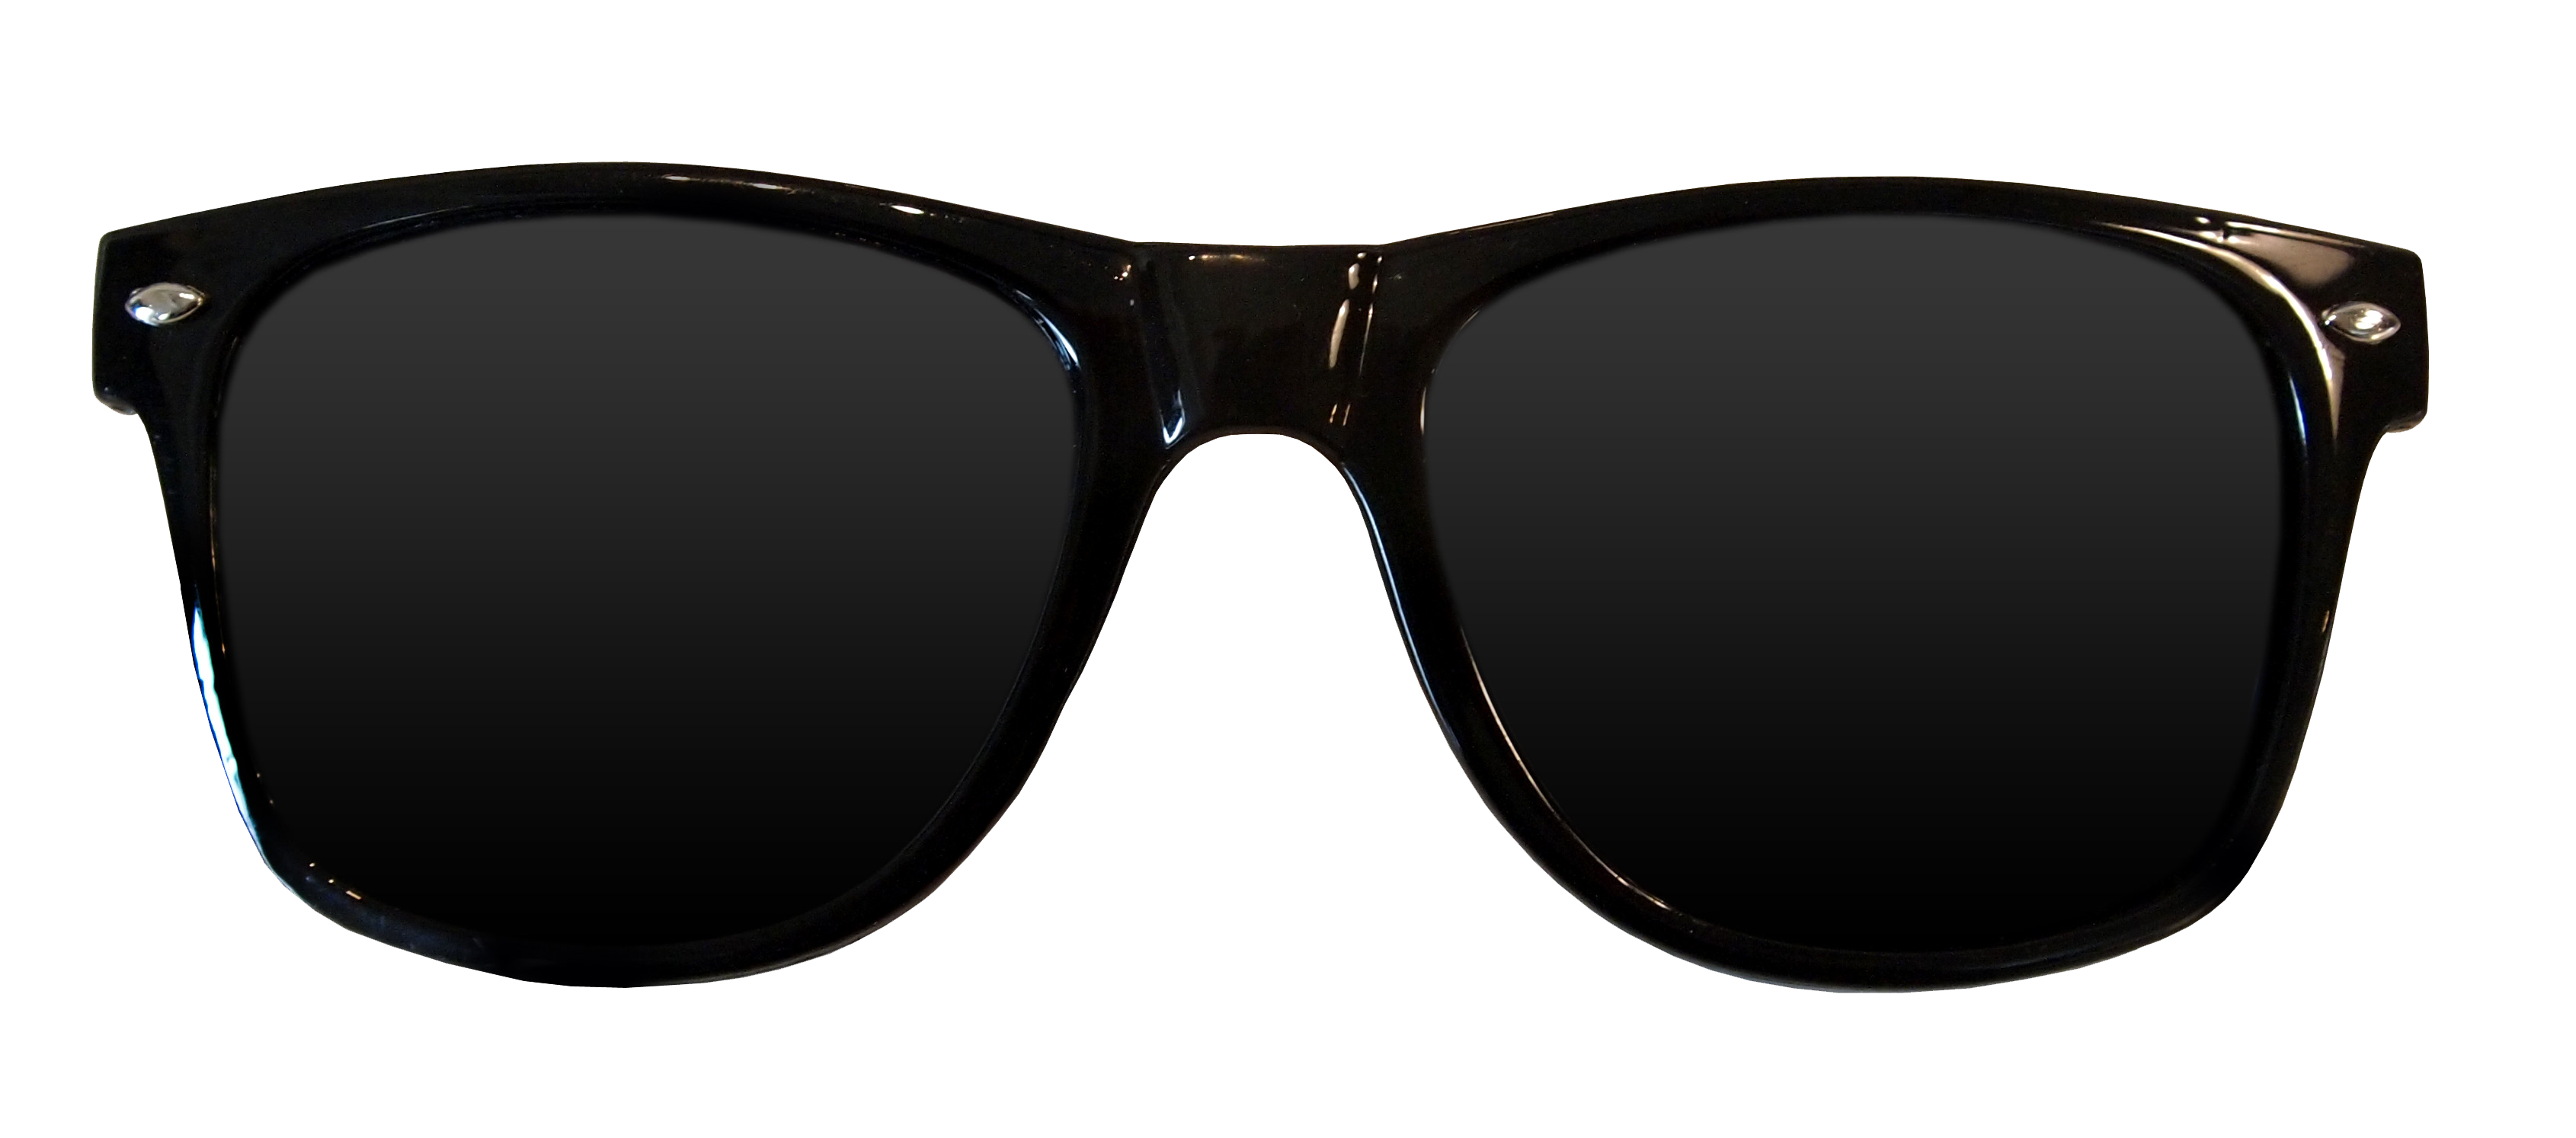 Sunglass PNG Images Transparent Free Download.